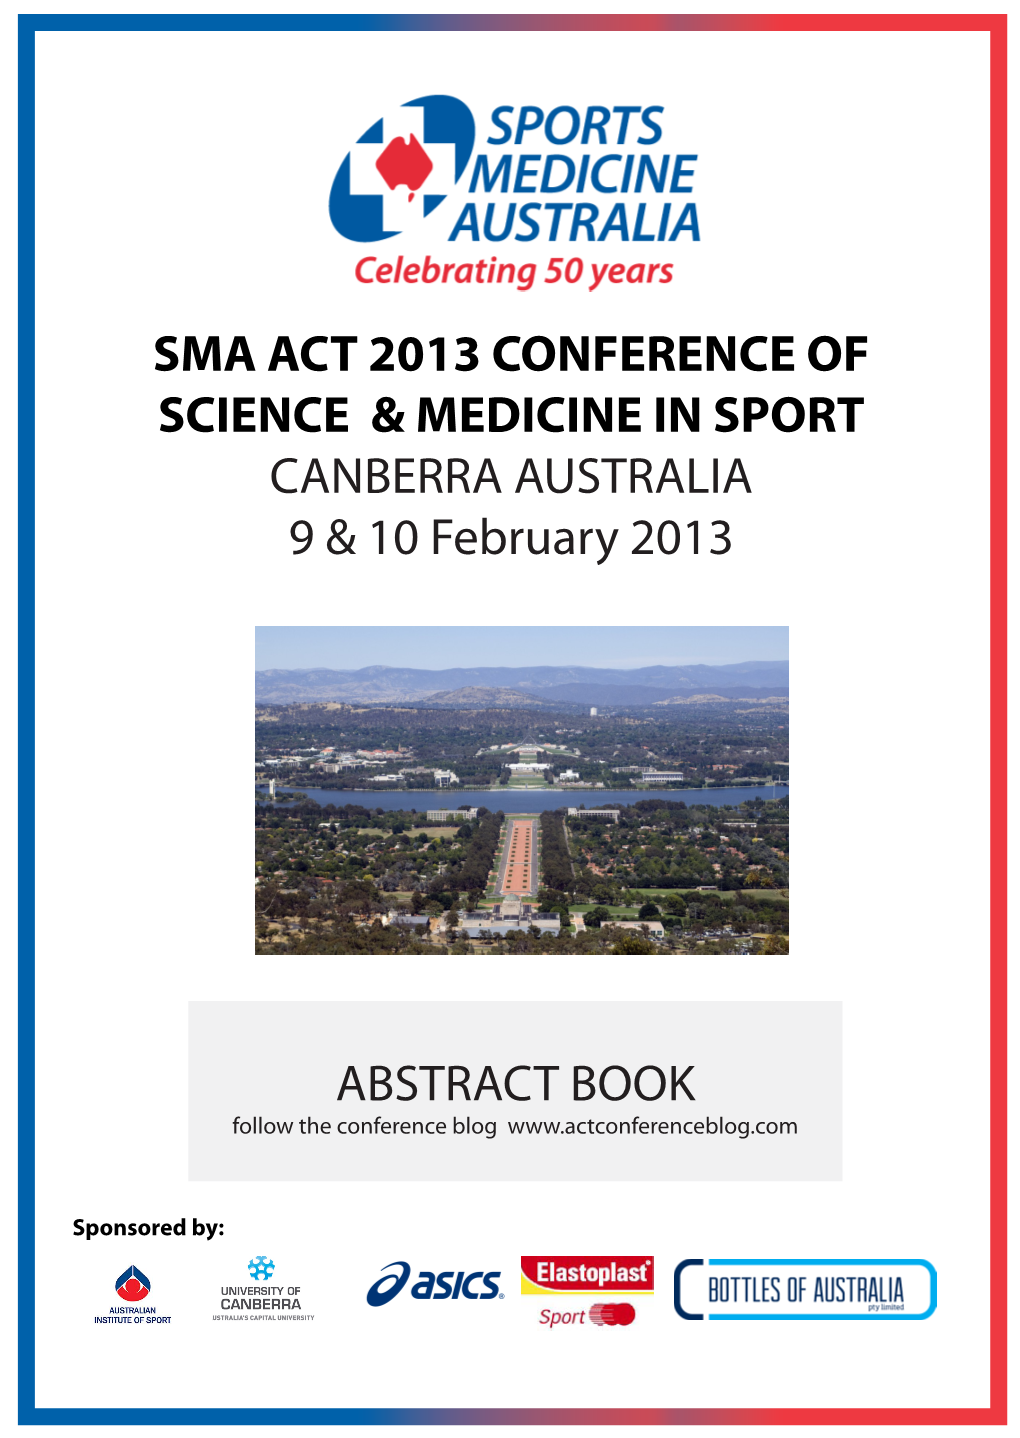 SMA ACT 2013 CONFERENCE of SCIENCE & MEDICINE in SPORT CANBERRA AUSTRALIA 9 & 10 February 2013 ABSTRACT BOOK